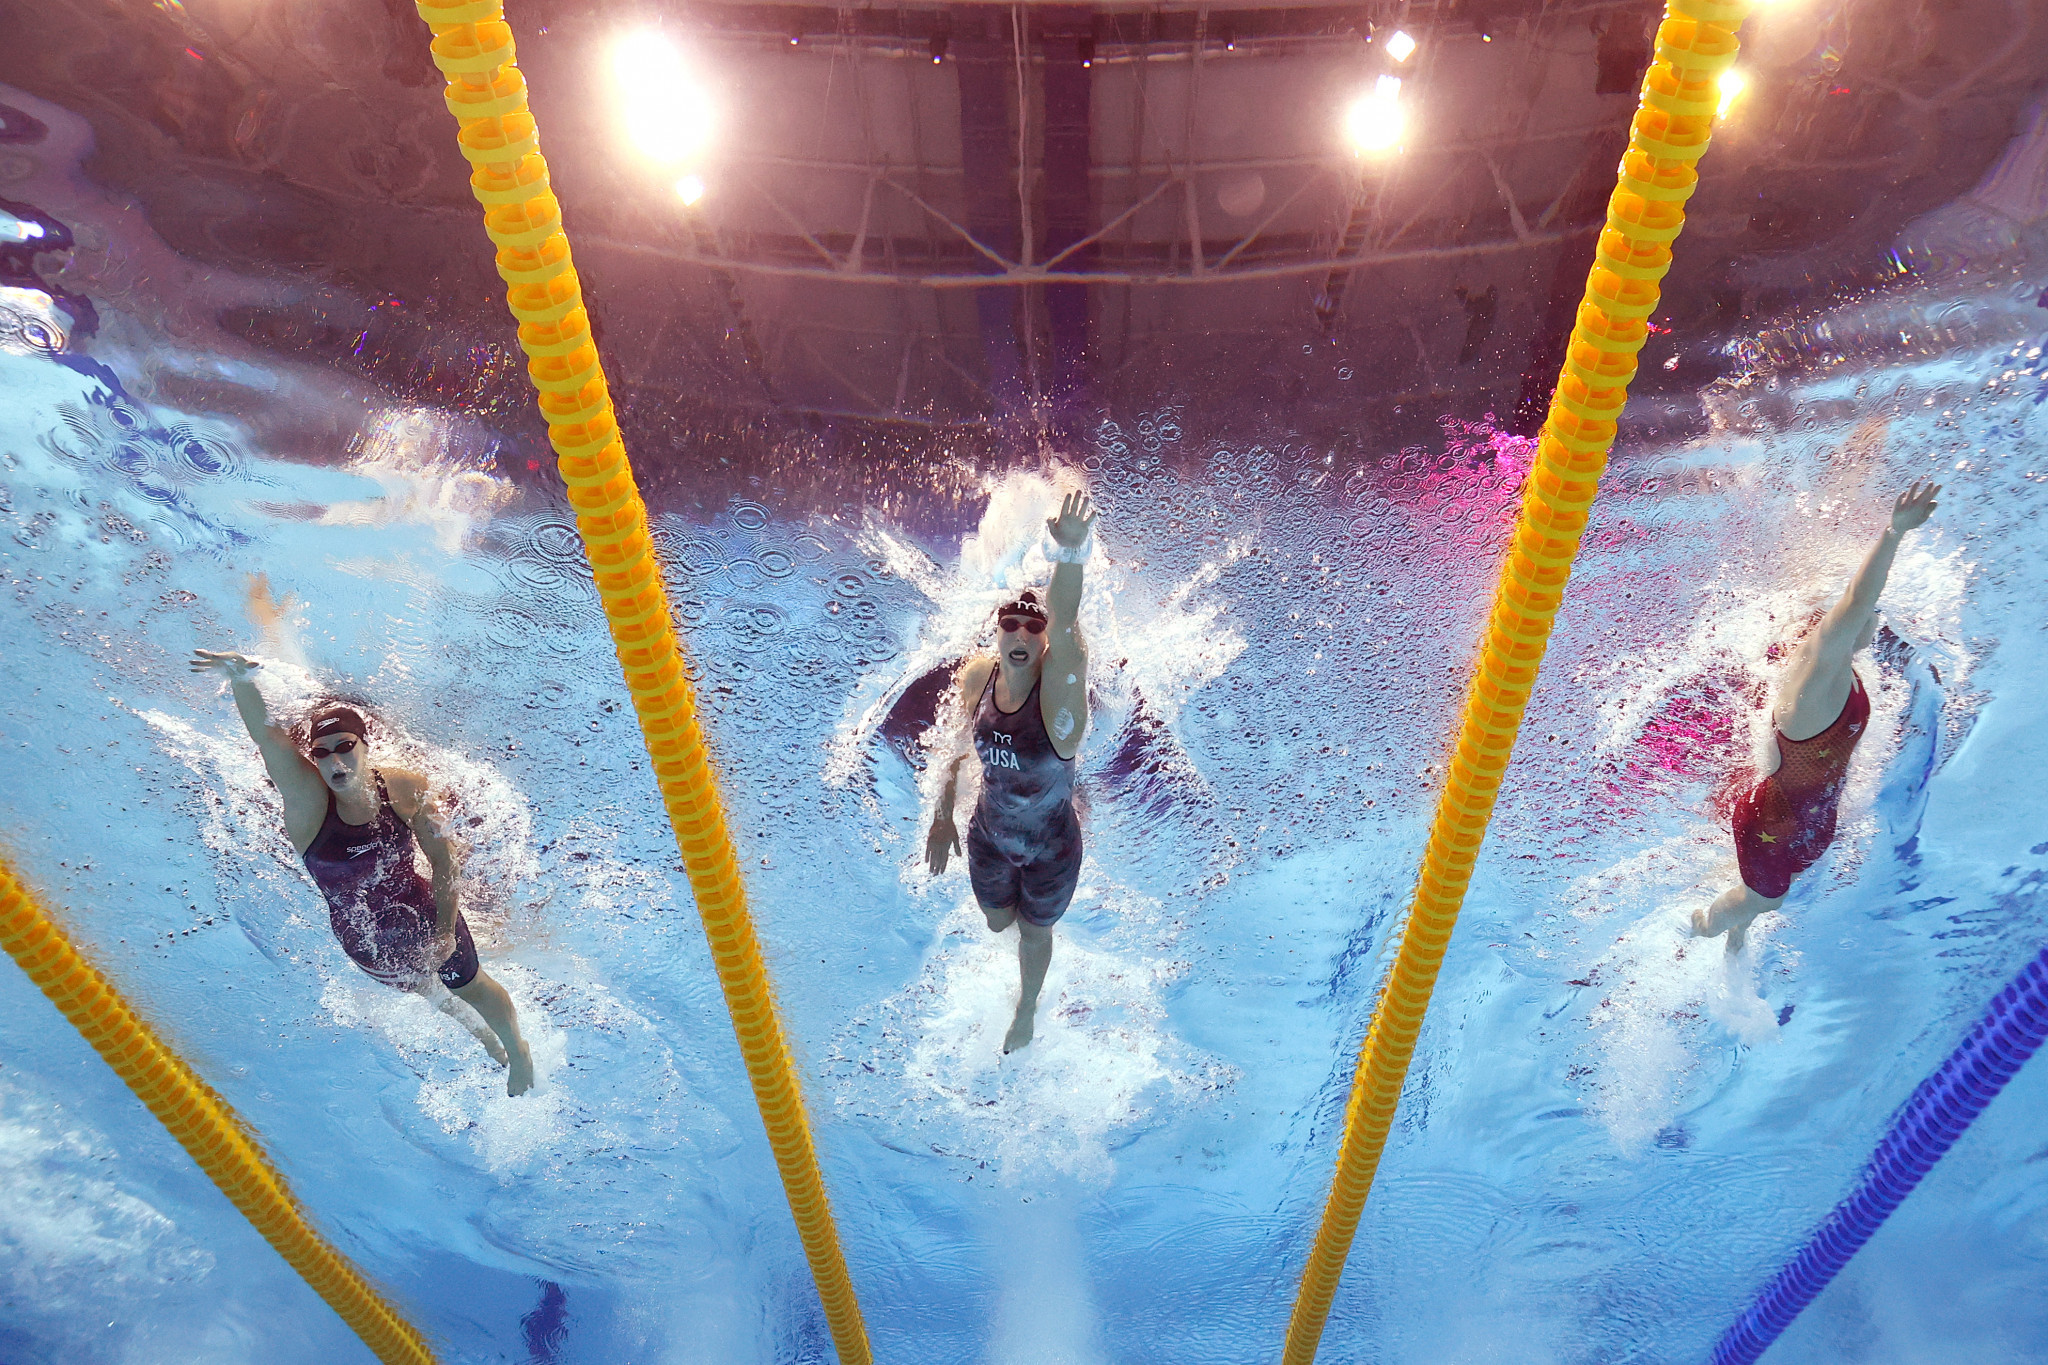 Swimming and diving return to usual slots for 2023 World Aquatics